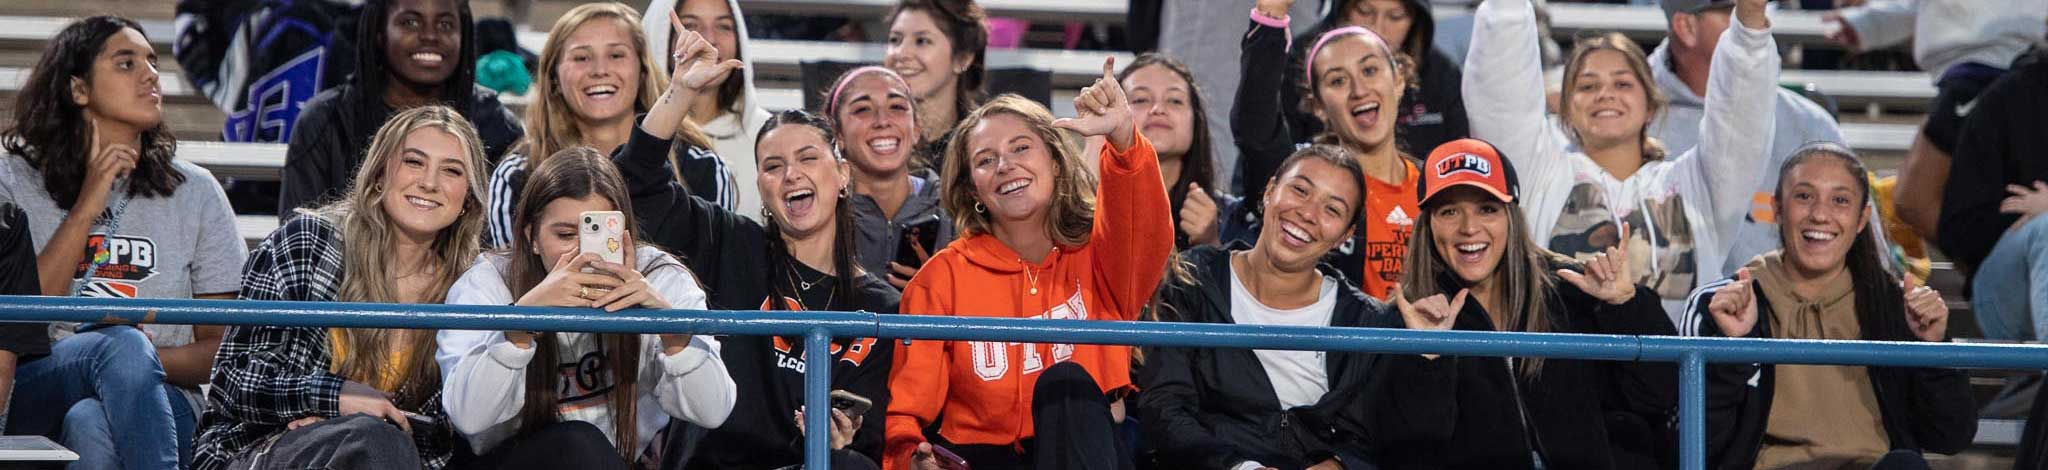 Students smiling together at football game